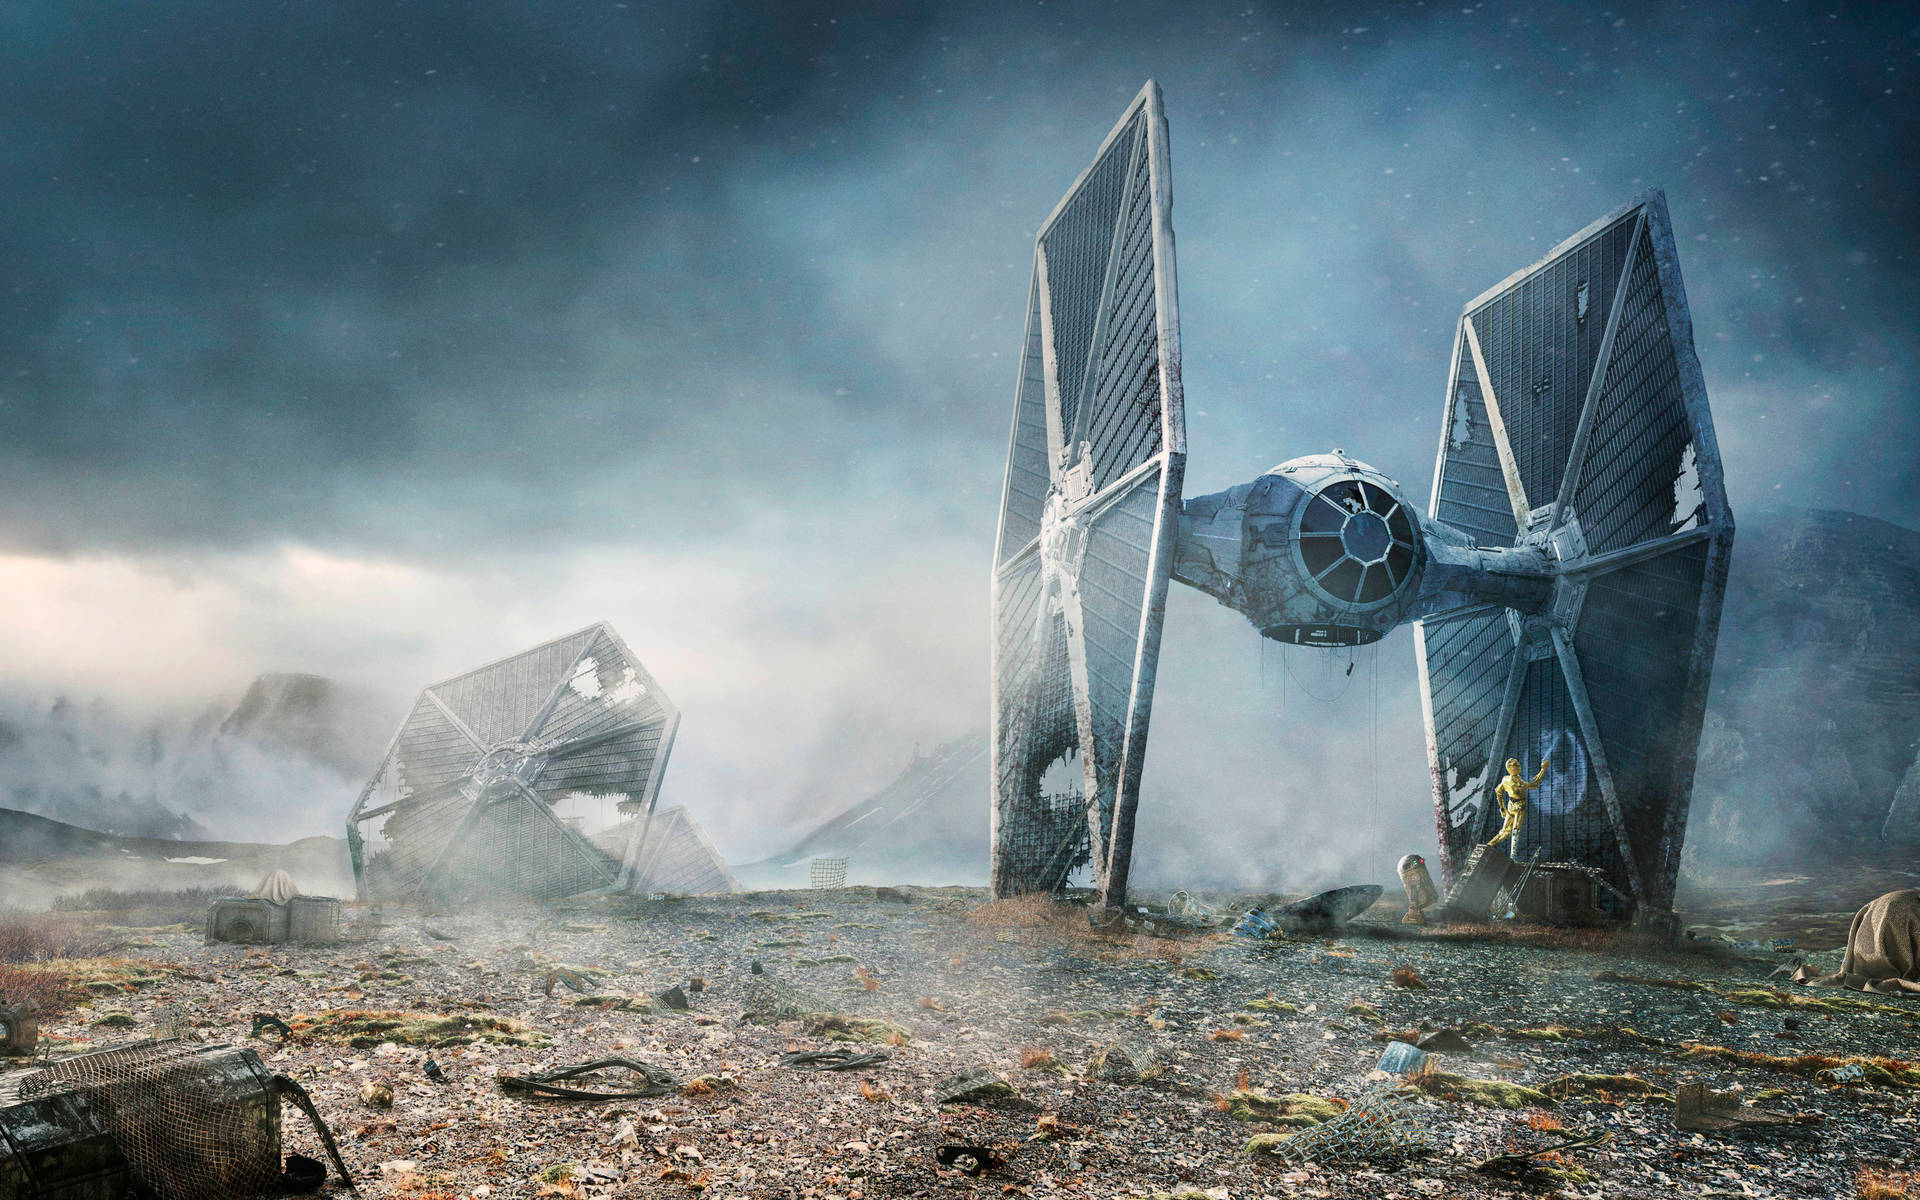 Soaring into battle in the iconic TIE Fighter Wallpaper